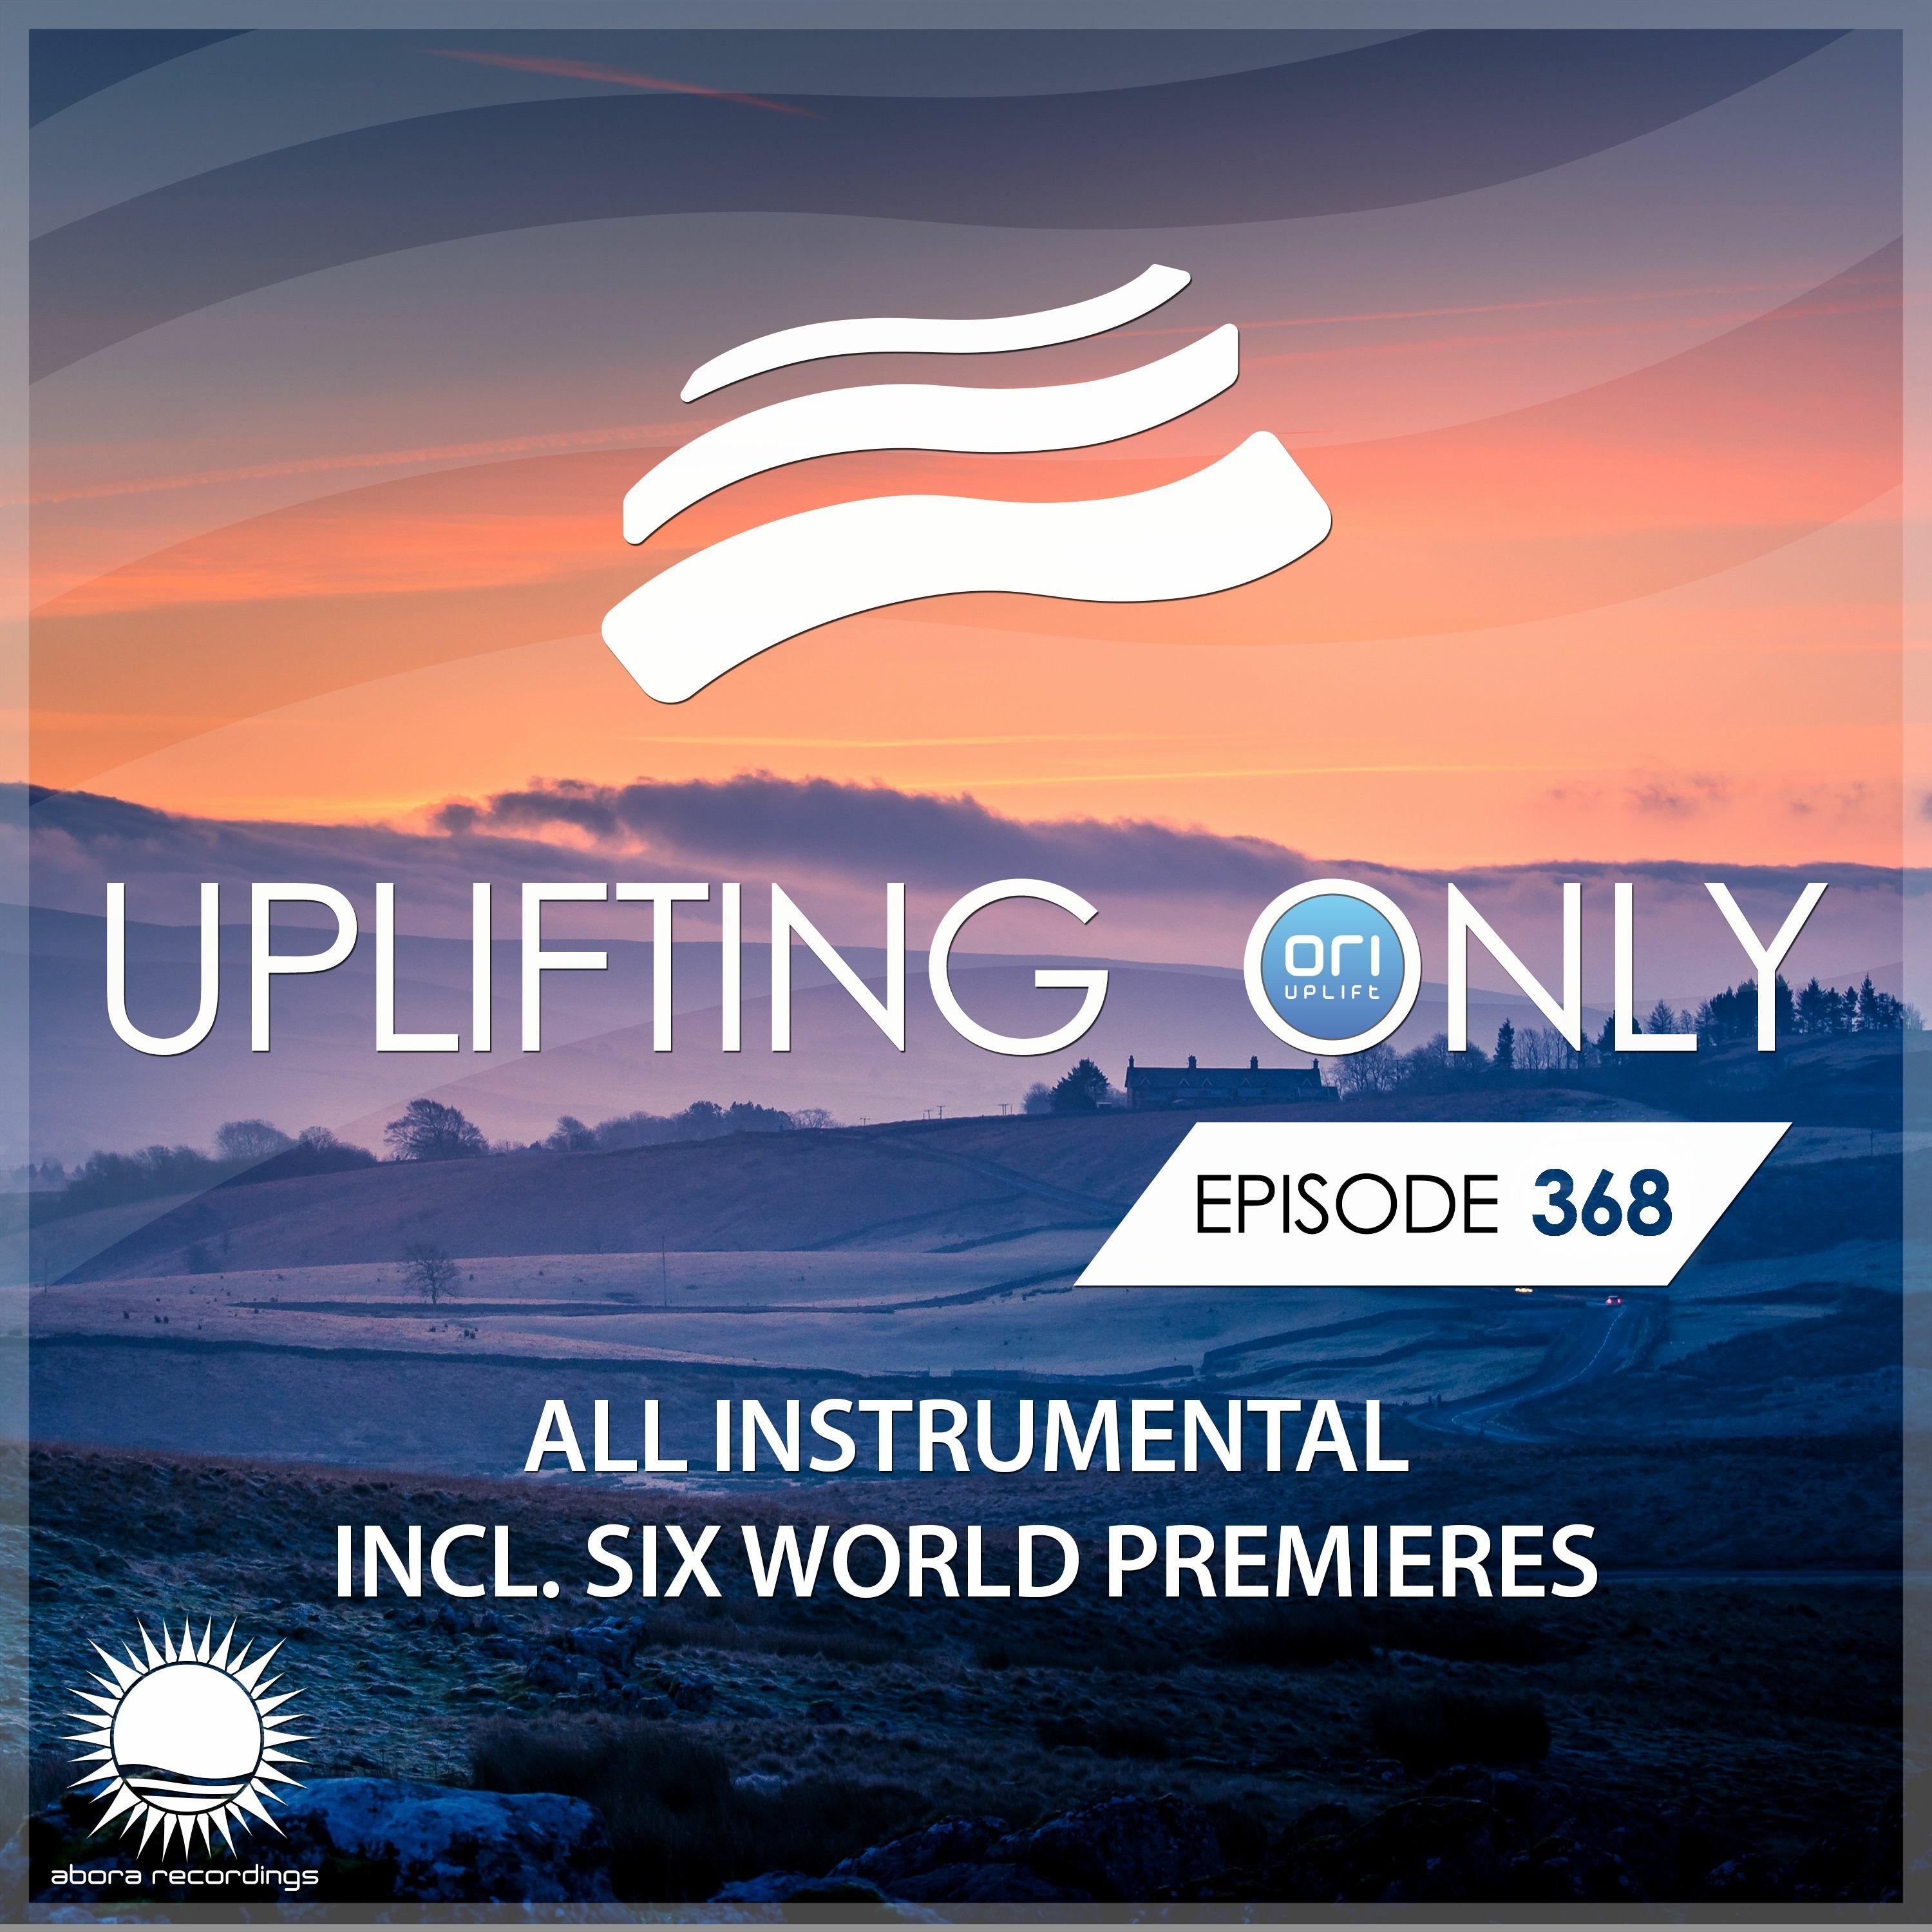 Uplifting Only 368 (Feb 27, 2020) [All Instrumental]